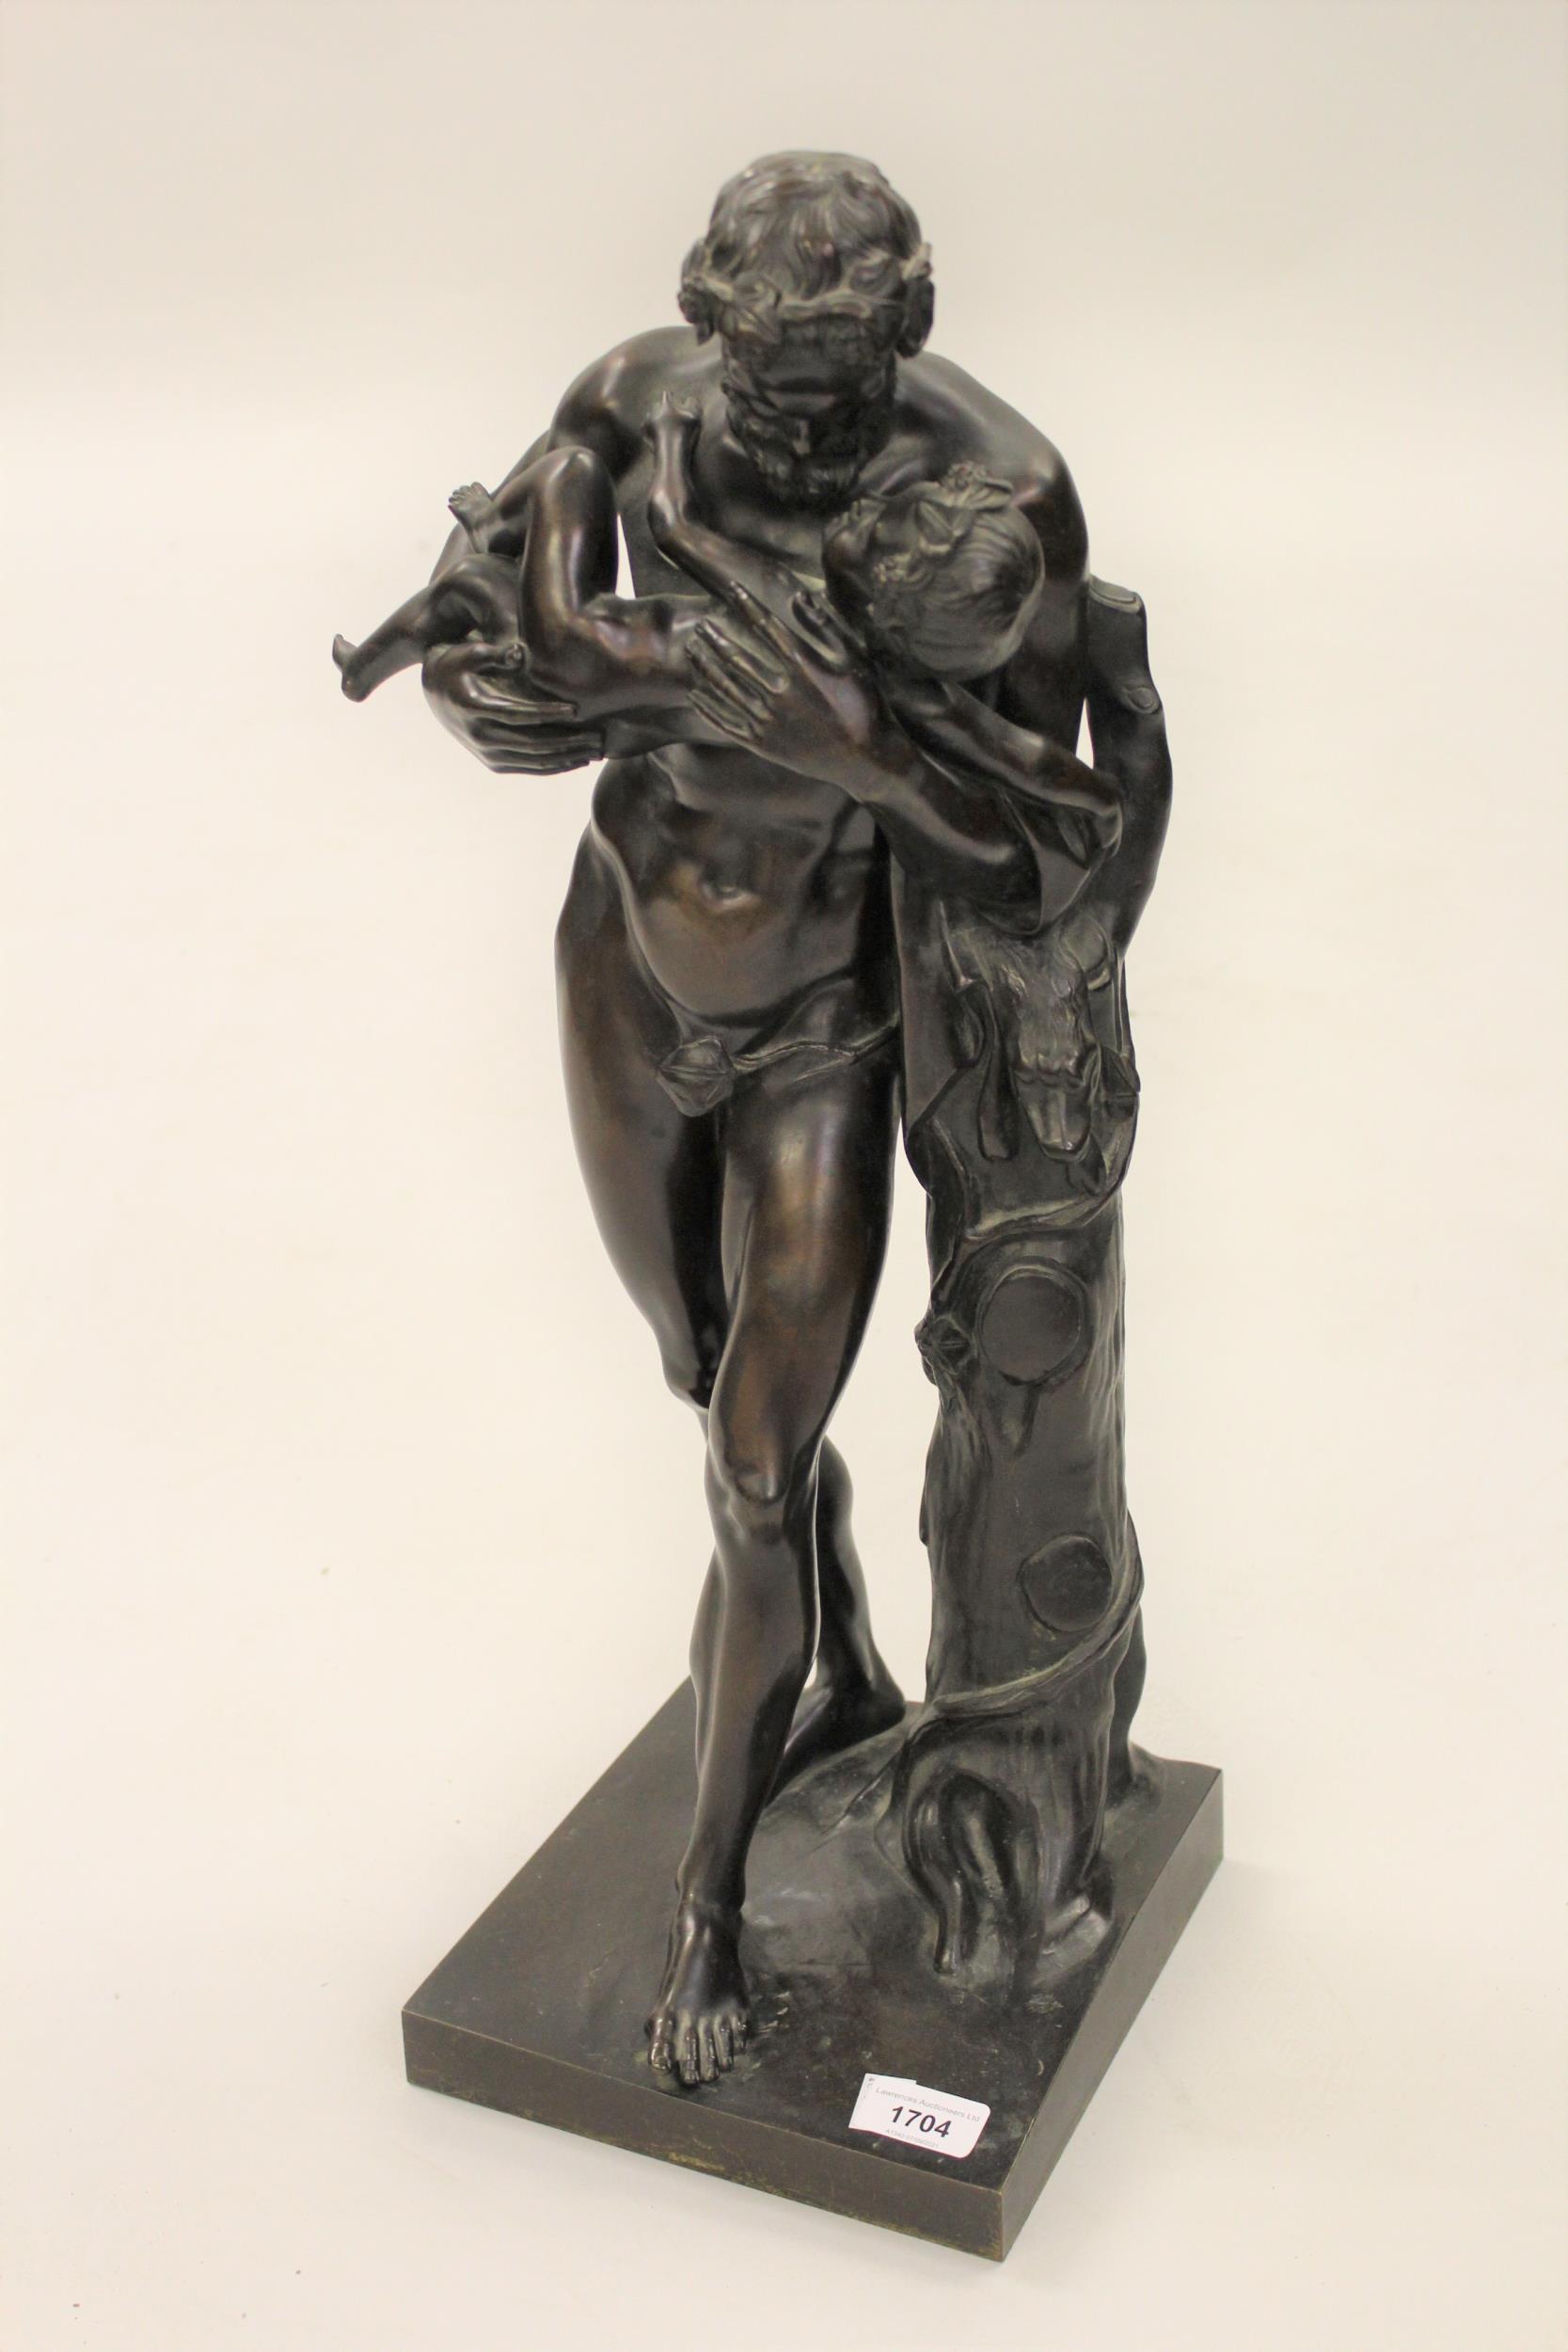 19th Century dark patinated bronze figure of a faun carrying a child beside a tree stump, on an